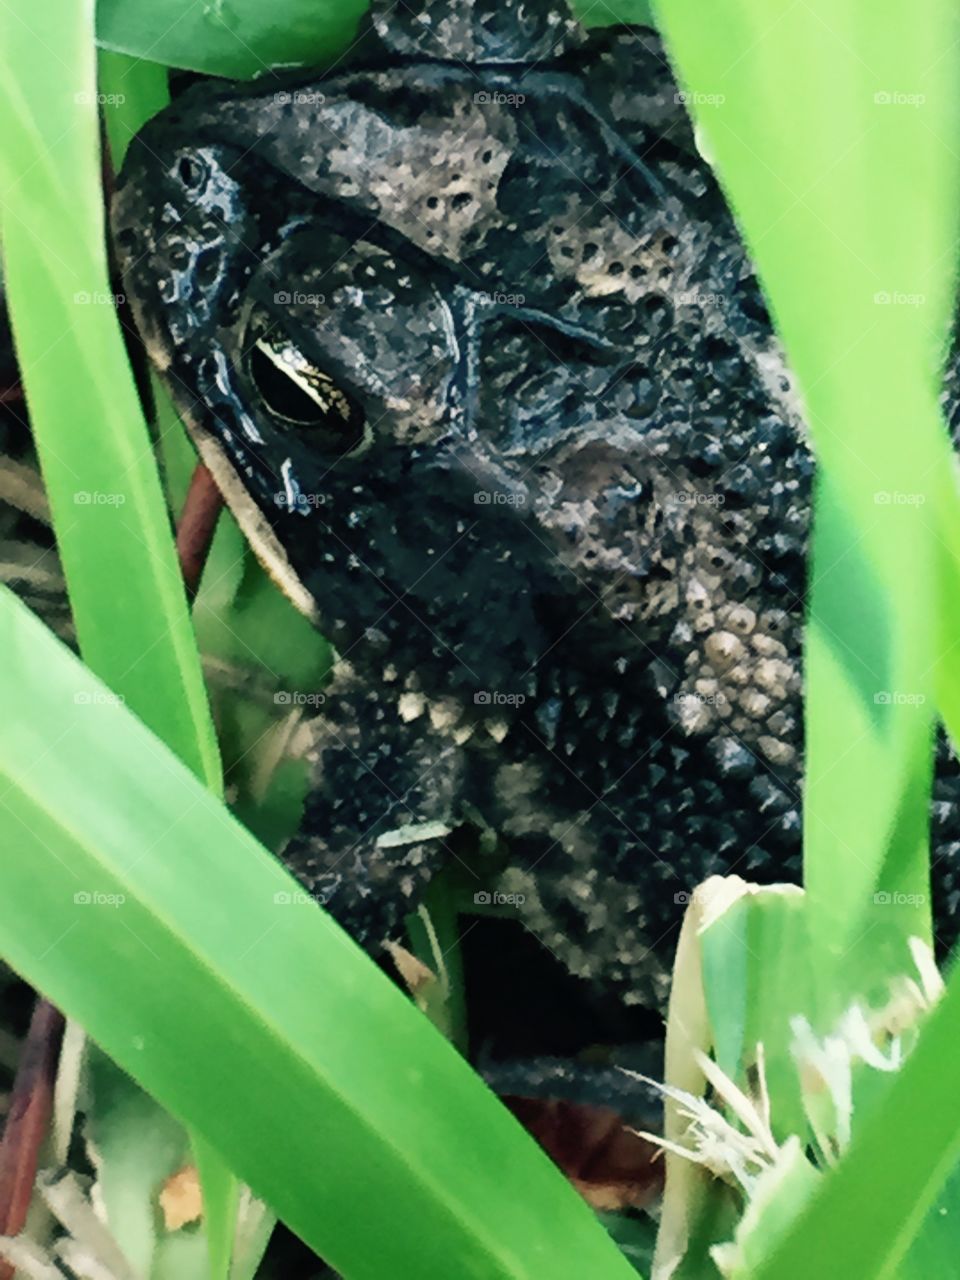 Close up on a frog I found in my backyard 